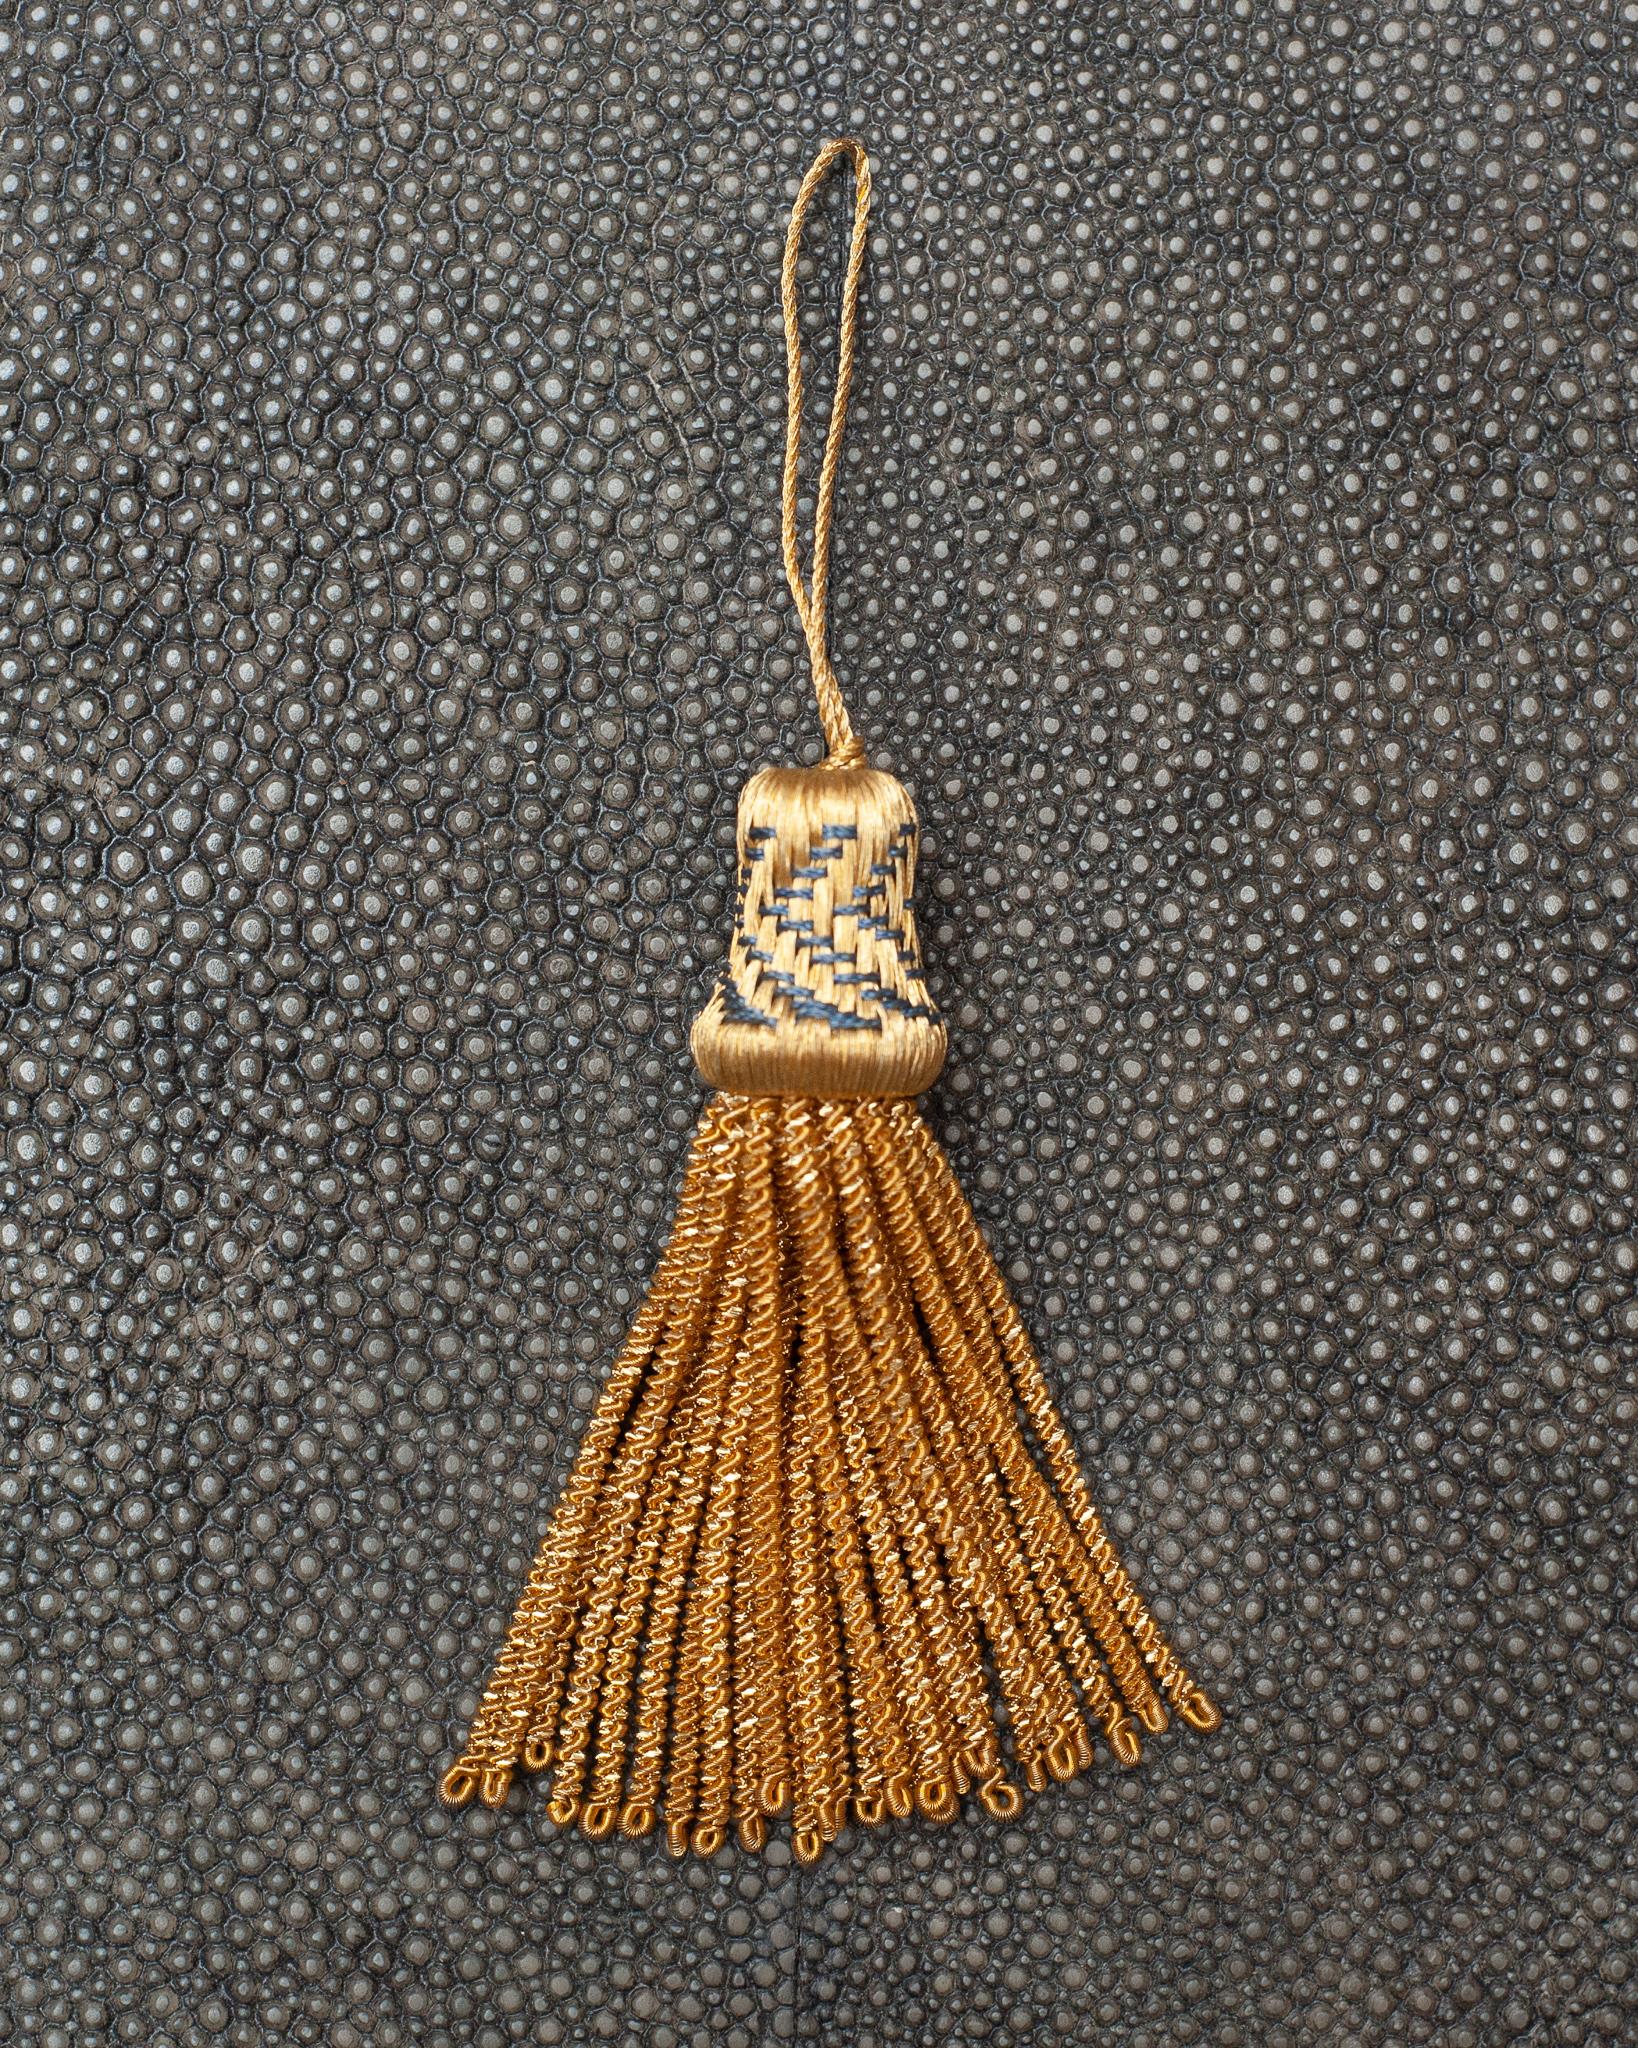 A beautiful metallic silk tassel, from Bevilacqua Italy. Established by Luigi Bevilacqua, and operating out of Venice since 1875, Bevilacqua Tessuti produces the most exquisite handwoven fabrics available out of Europe following ancient techniques